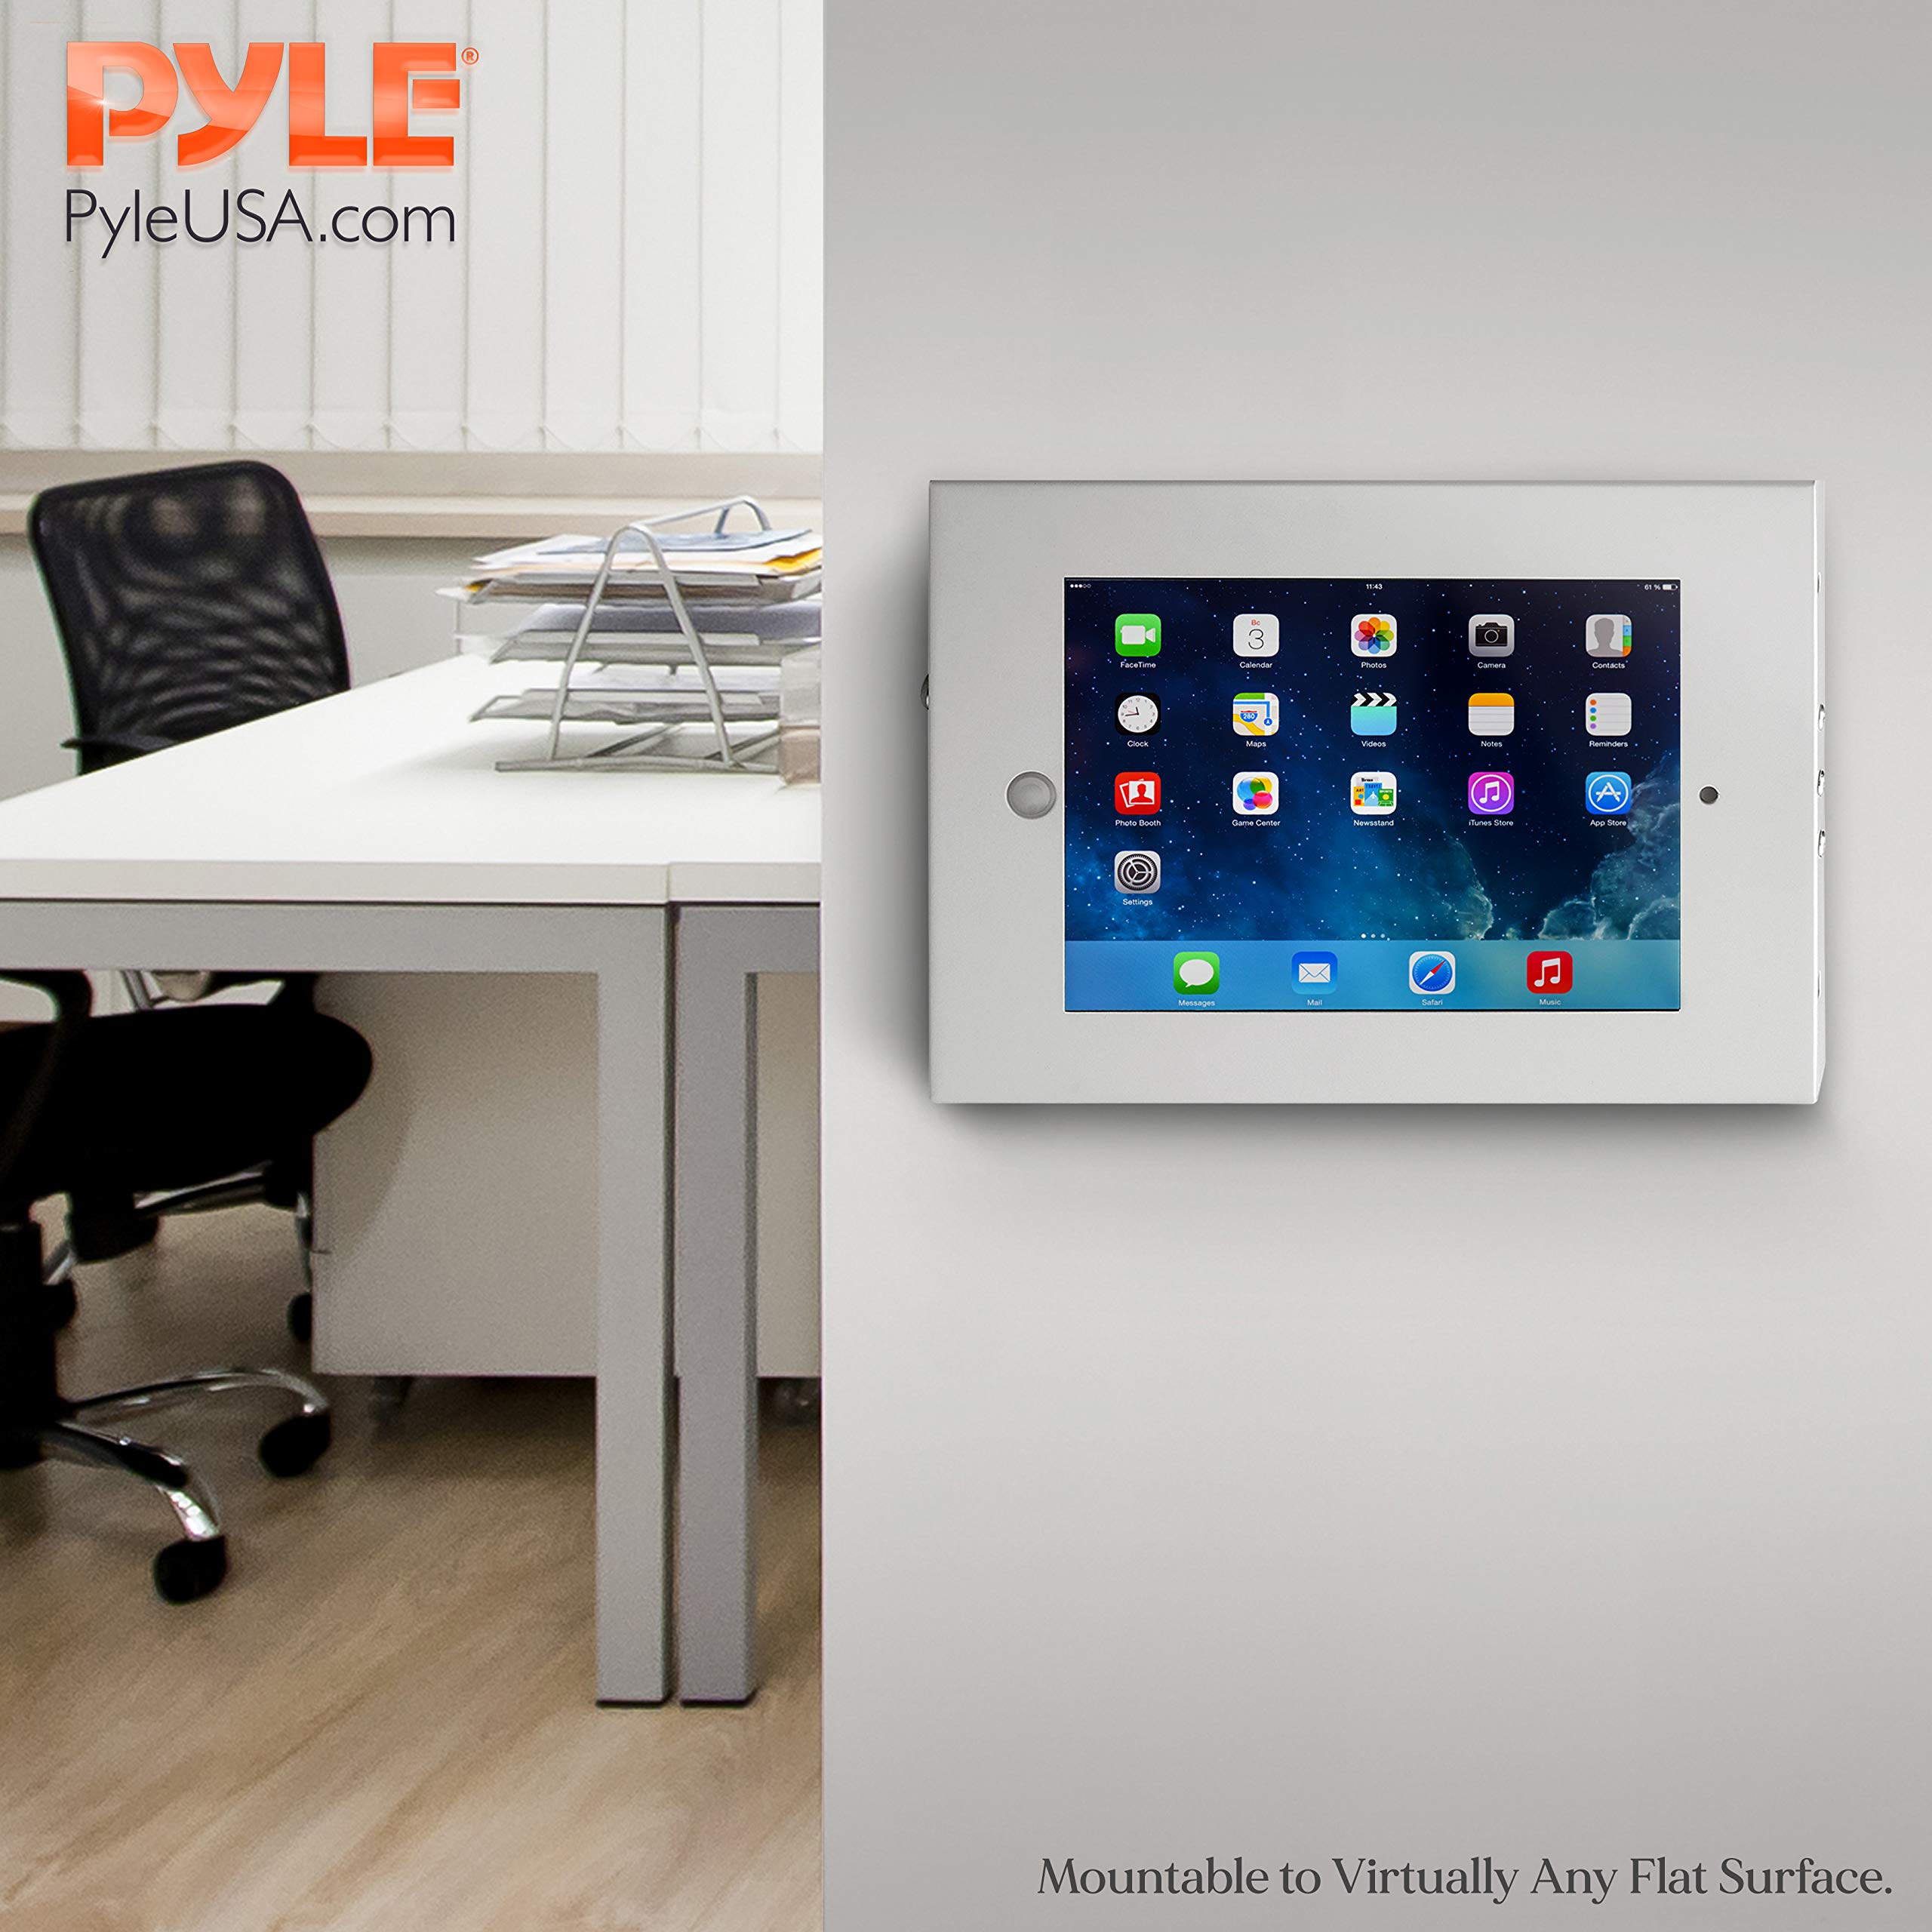 Pyle Anti-Theft Tablet Security Case Holder - 11 Inch Metal Heavy Duty Vesa Wall Mount Tablet Kiosk w/Lock and Key, Landscape/Portrait Mounting, for iPad 2, 3, 4, Air, Air 2 Tablets - PSPADLKW08W